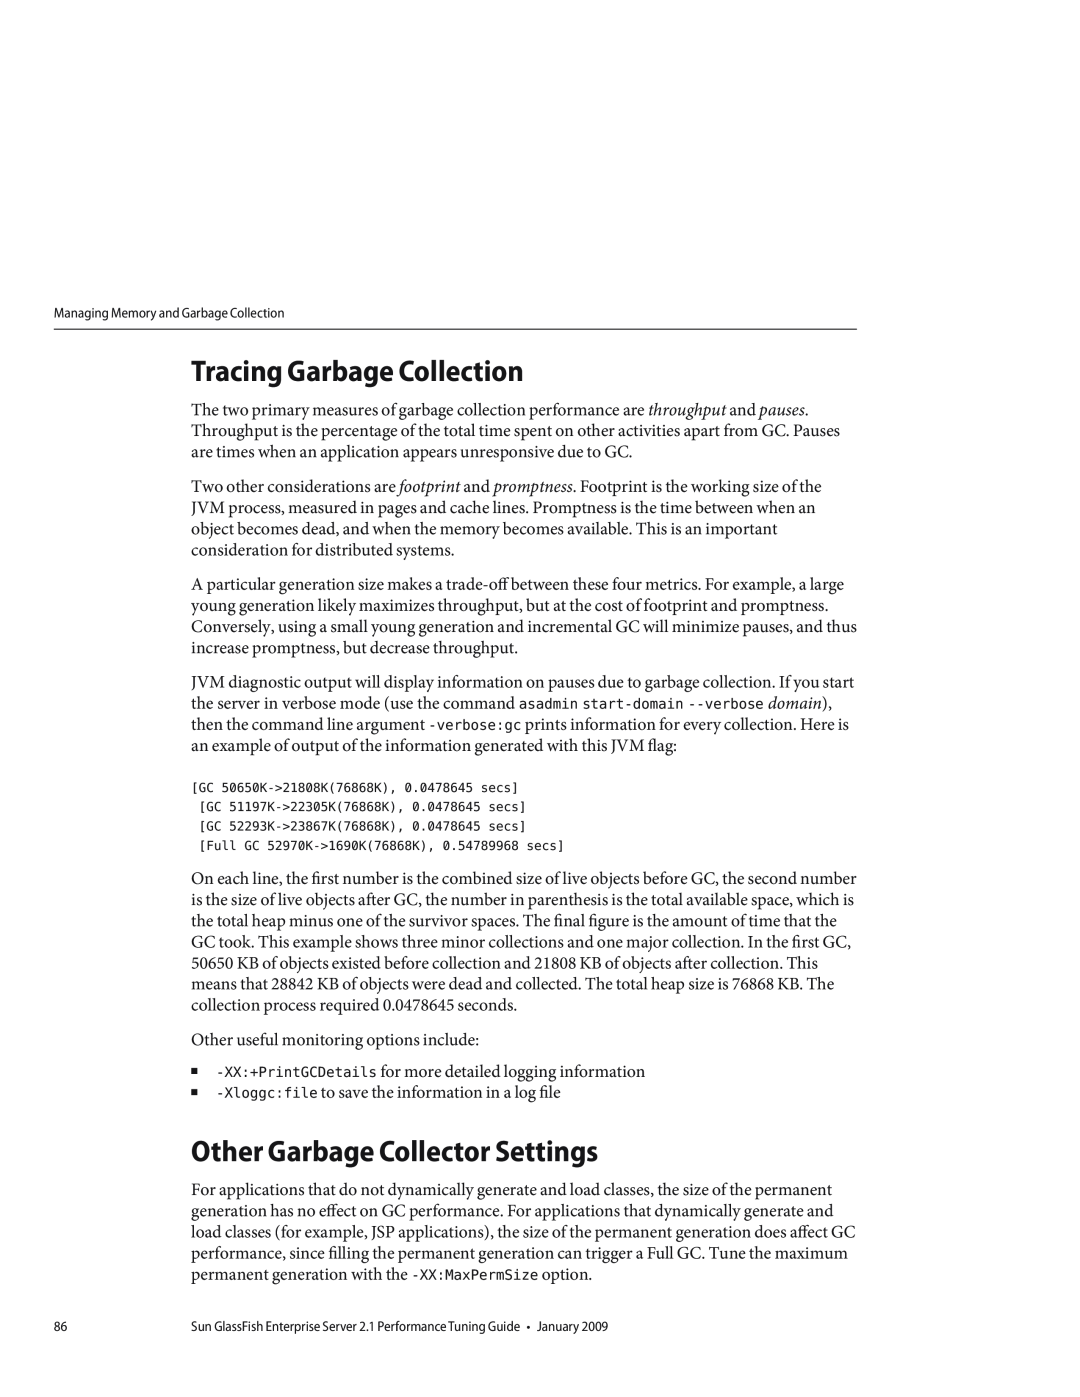 Sun Microsystems 820434310 manual Tracing Garbage Collection, Other Garbage Collector Settings 